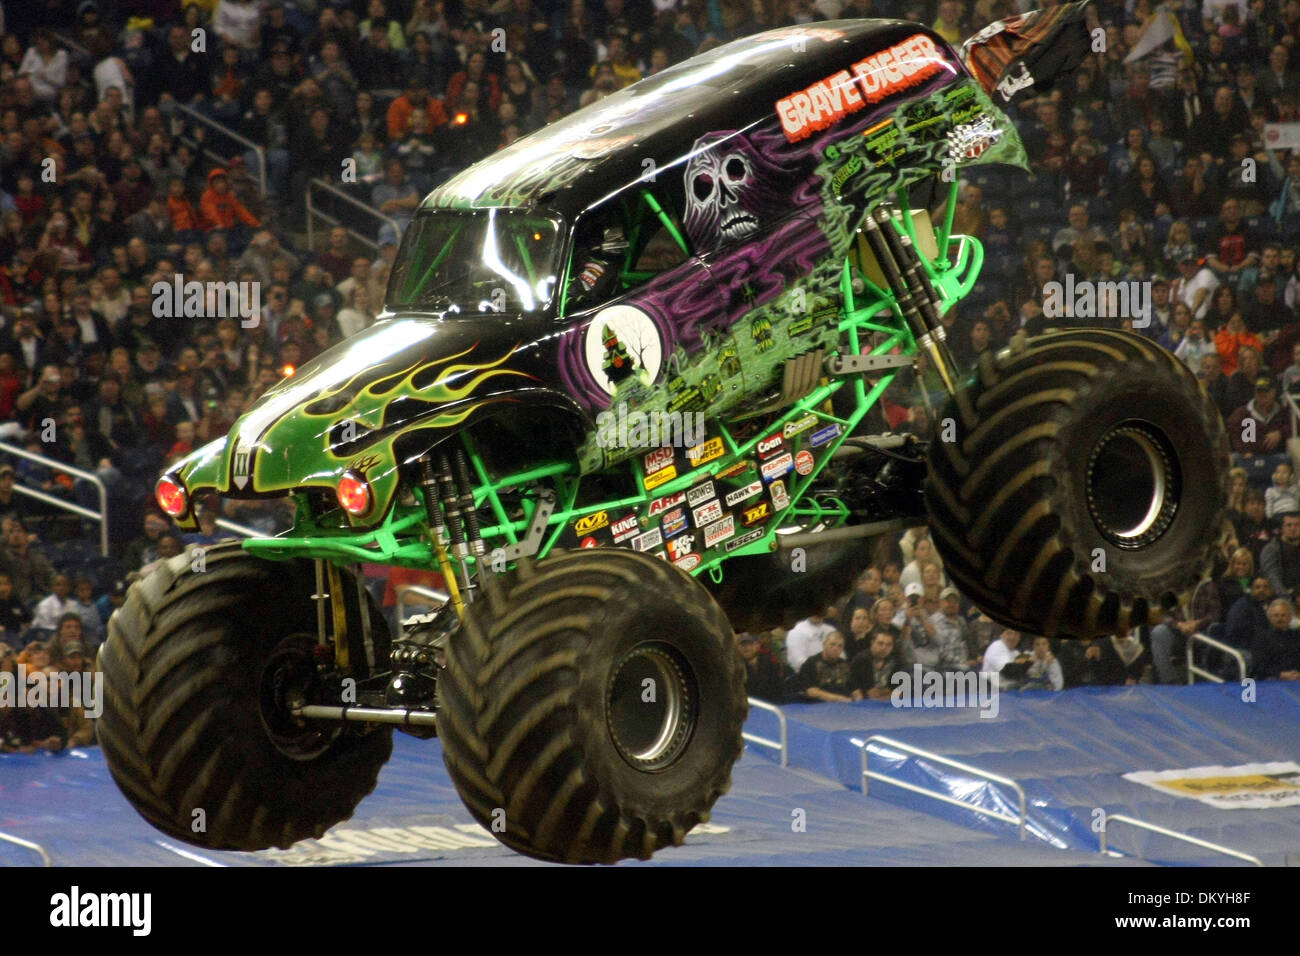 Jan. 16, 2010 - Detroit, Michigan, U.S - 16 January 2010: Grave Digger  comes down nose first. Monster